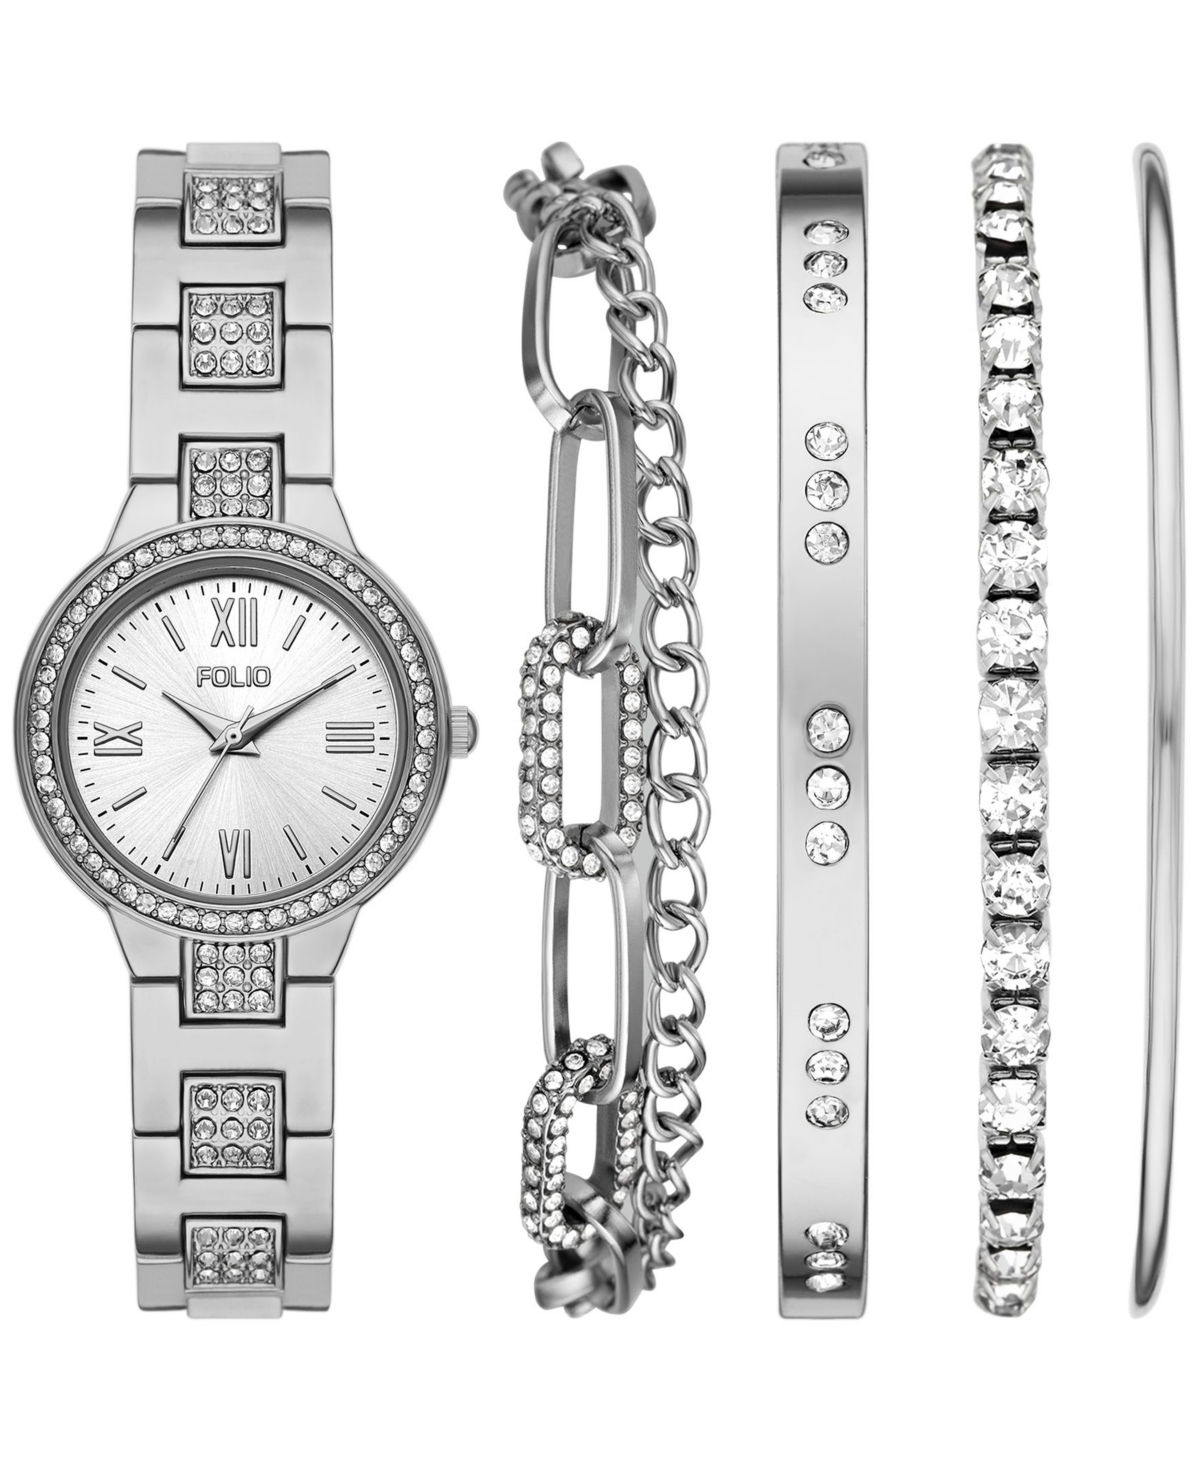 Women's Three Hand Silver-Tone Alloy Watch 30mm Gift Set - Silver-Tone